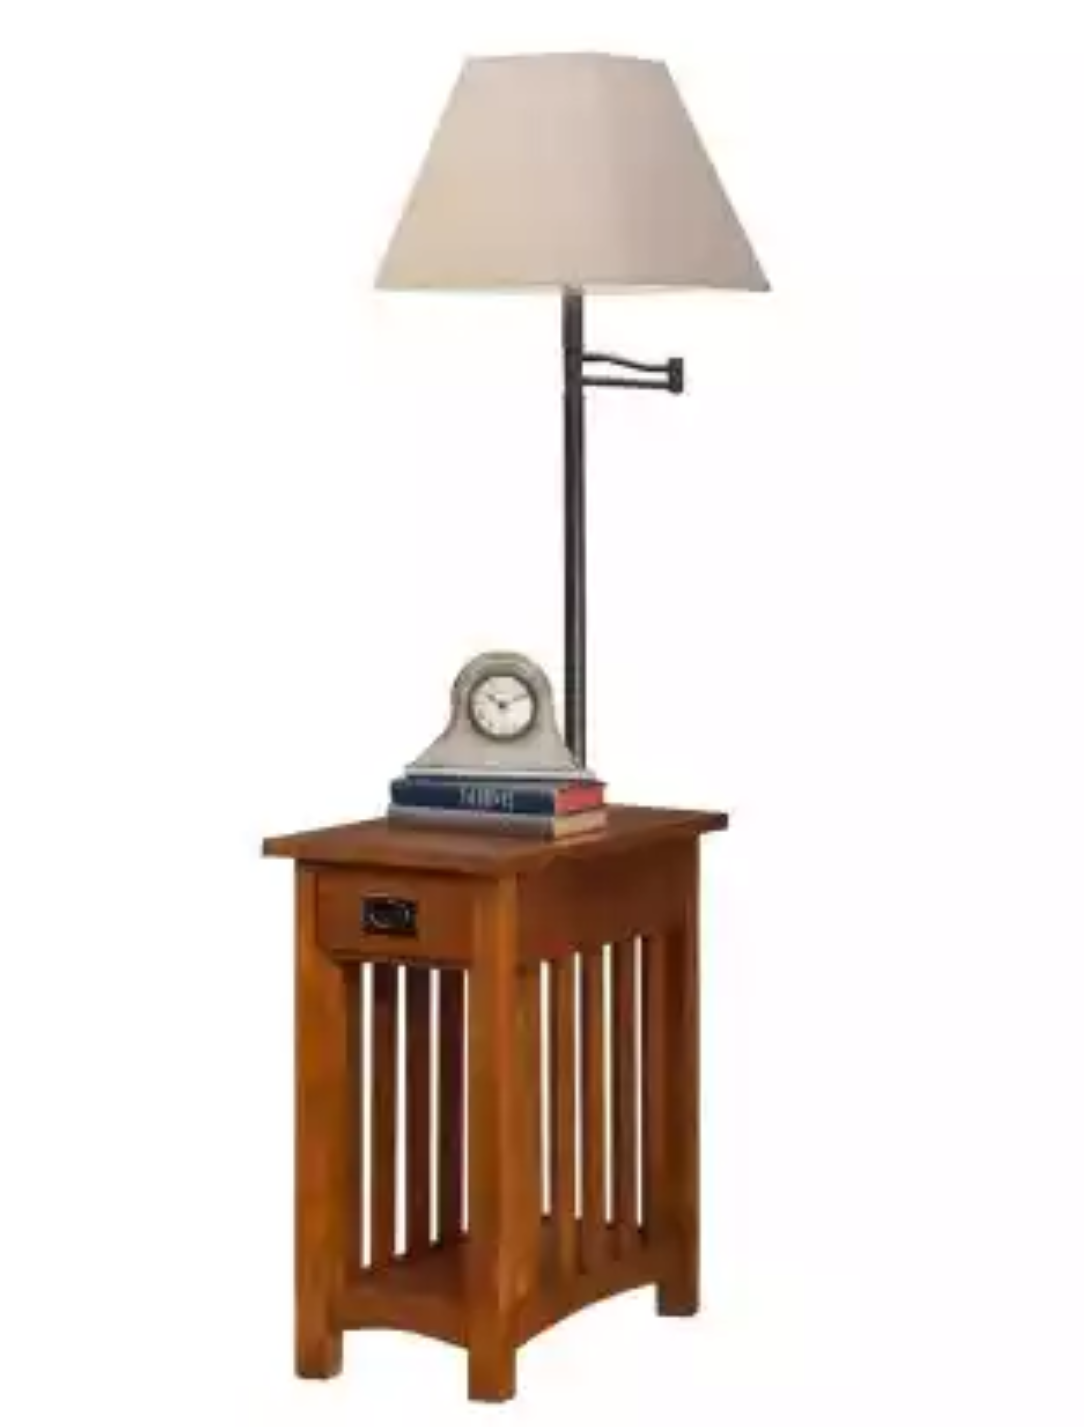 15 Floor Lamps With Table Attached The, Modern Floor Lamp With Attached Table